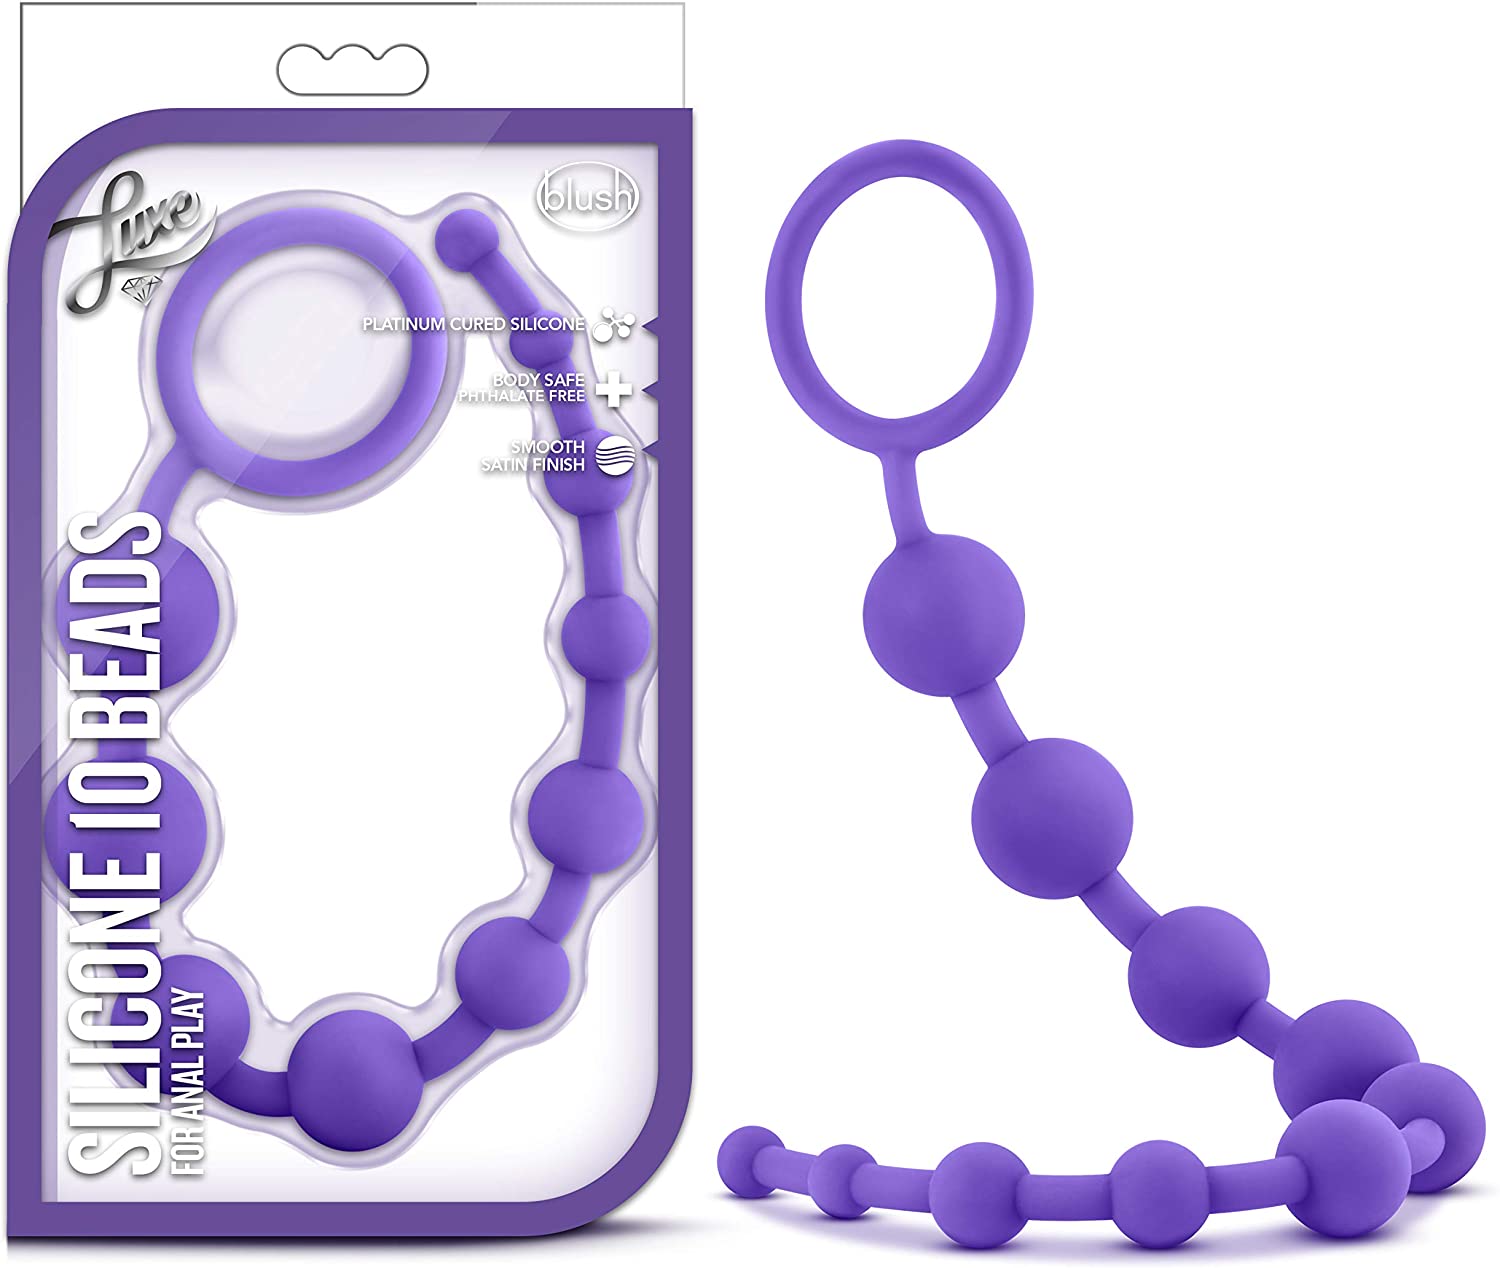 The Luxe Silicone 10 beads let you safely explore anal play. Our Silicone 10 Beads come in three lush colours: pink, purple and indigo. Perfect for the beginning of anal exploration, these would make an excellent gift to ...Anal Beads Pleasure Play Duchess and Daisy Australia Same Day Shipping Pay Later Anal Plugs